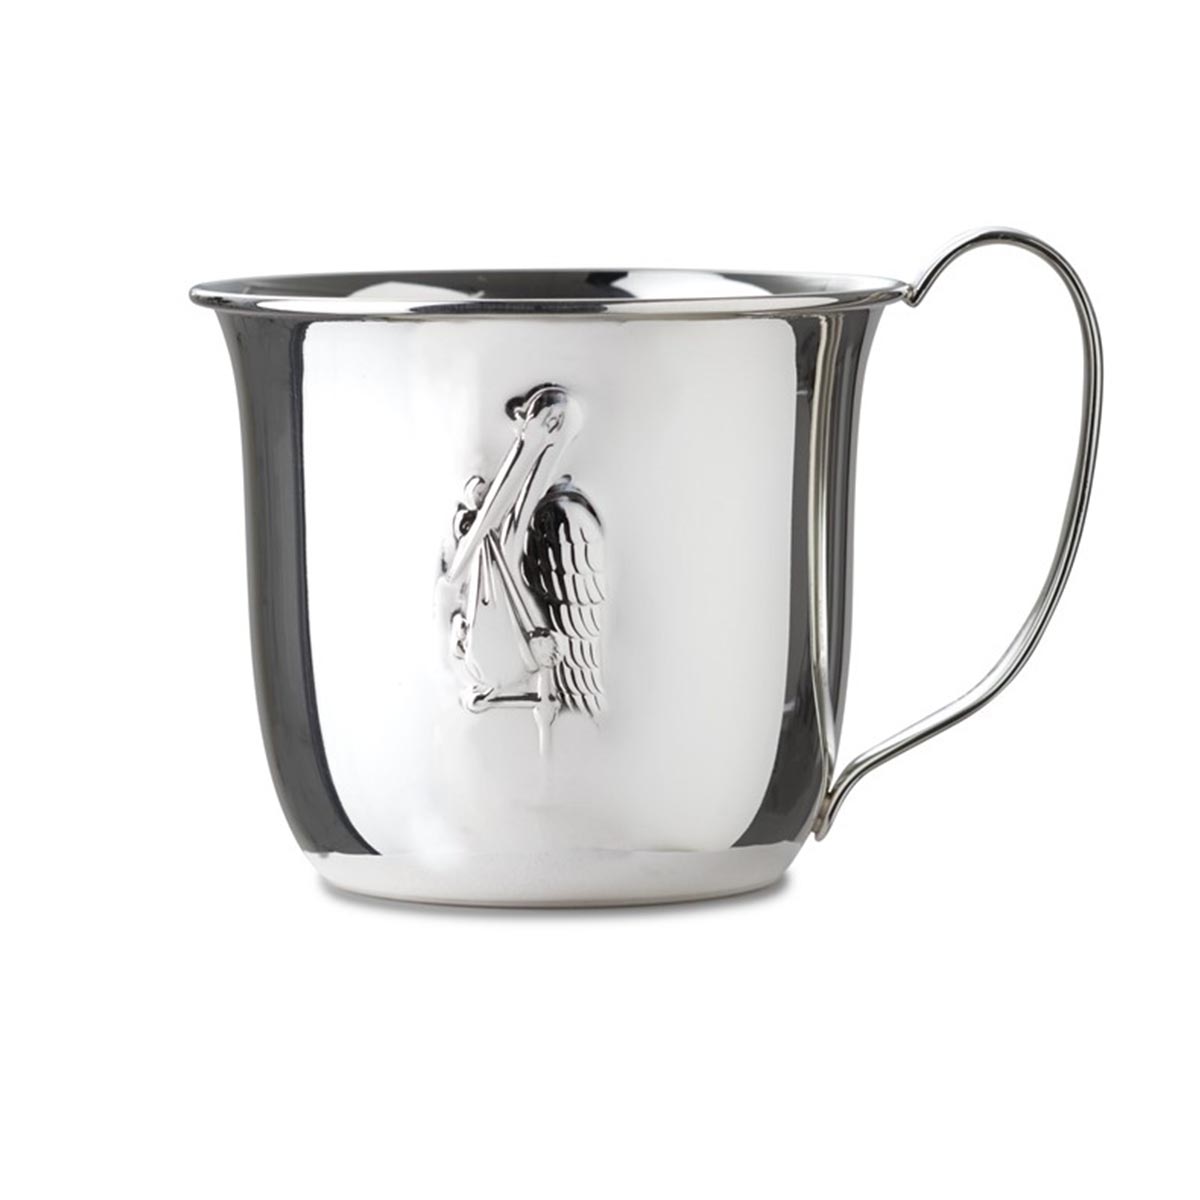 A classic and elegant children's cup in silver with a stork motive in 830 silver. A great gift for a baptism, name party, or birthday. Silver is antibacterial so the cup is especially suitable as a drinking cup for children. Engraving of the child's name and/or date can be made on the opposite side of the stork motive.

The item is dishwasher-safe.

Item no. 525708
Length / Height: 6cm